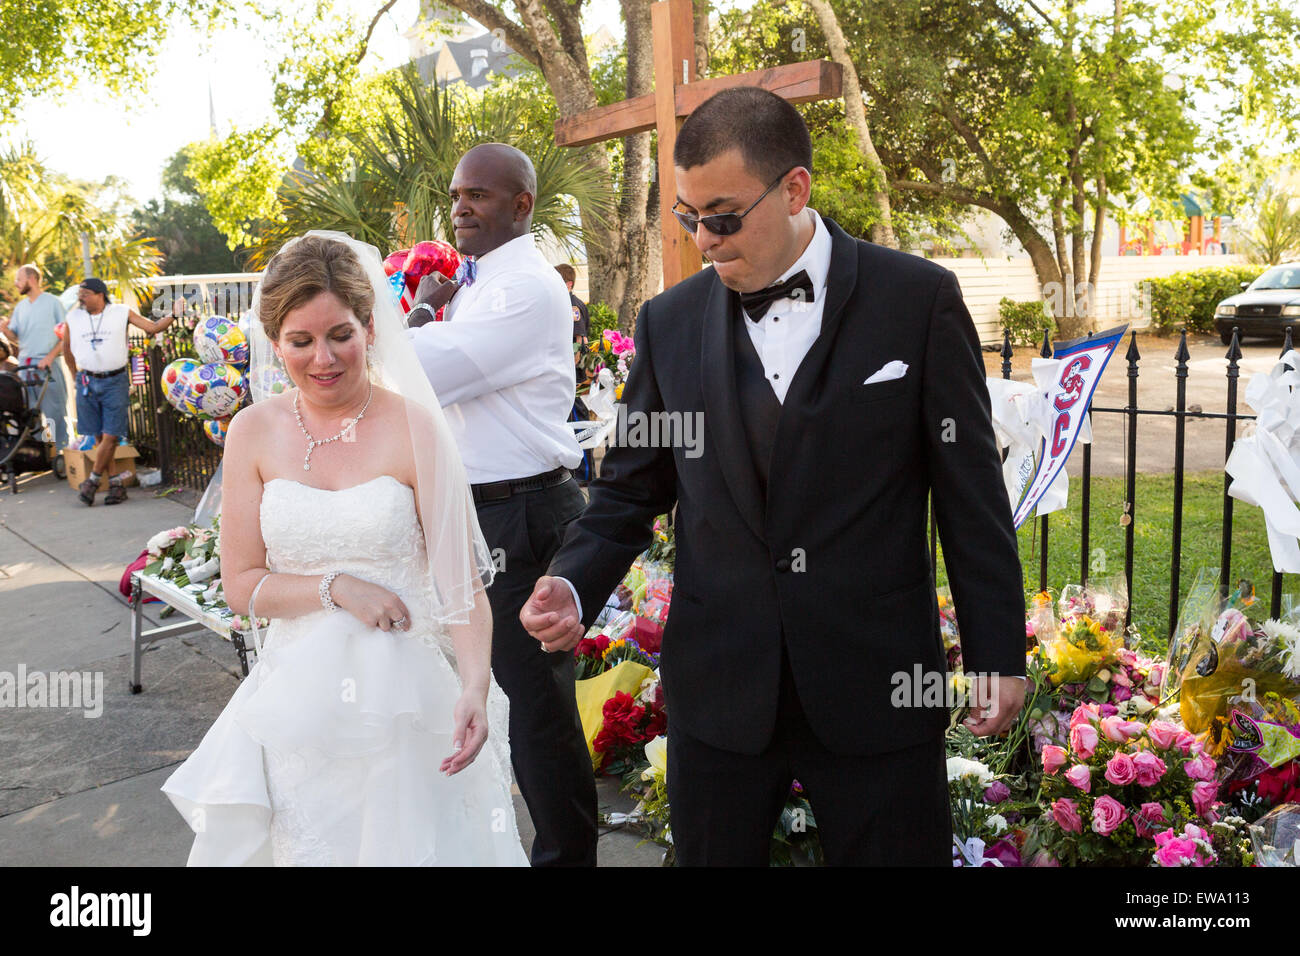 Newlyweds stop to pay respect at a makeshift memorial outside the historic mother Emanuel African Methodist Episcopal Church in their wedding cloths June 20, 2015 in Charleston, South Carolina. Earlier in the week a white supremacist gunman killed 9 members at the historically black church. Stock Photo